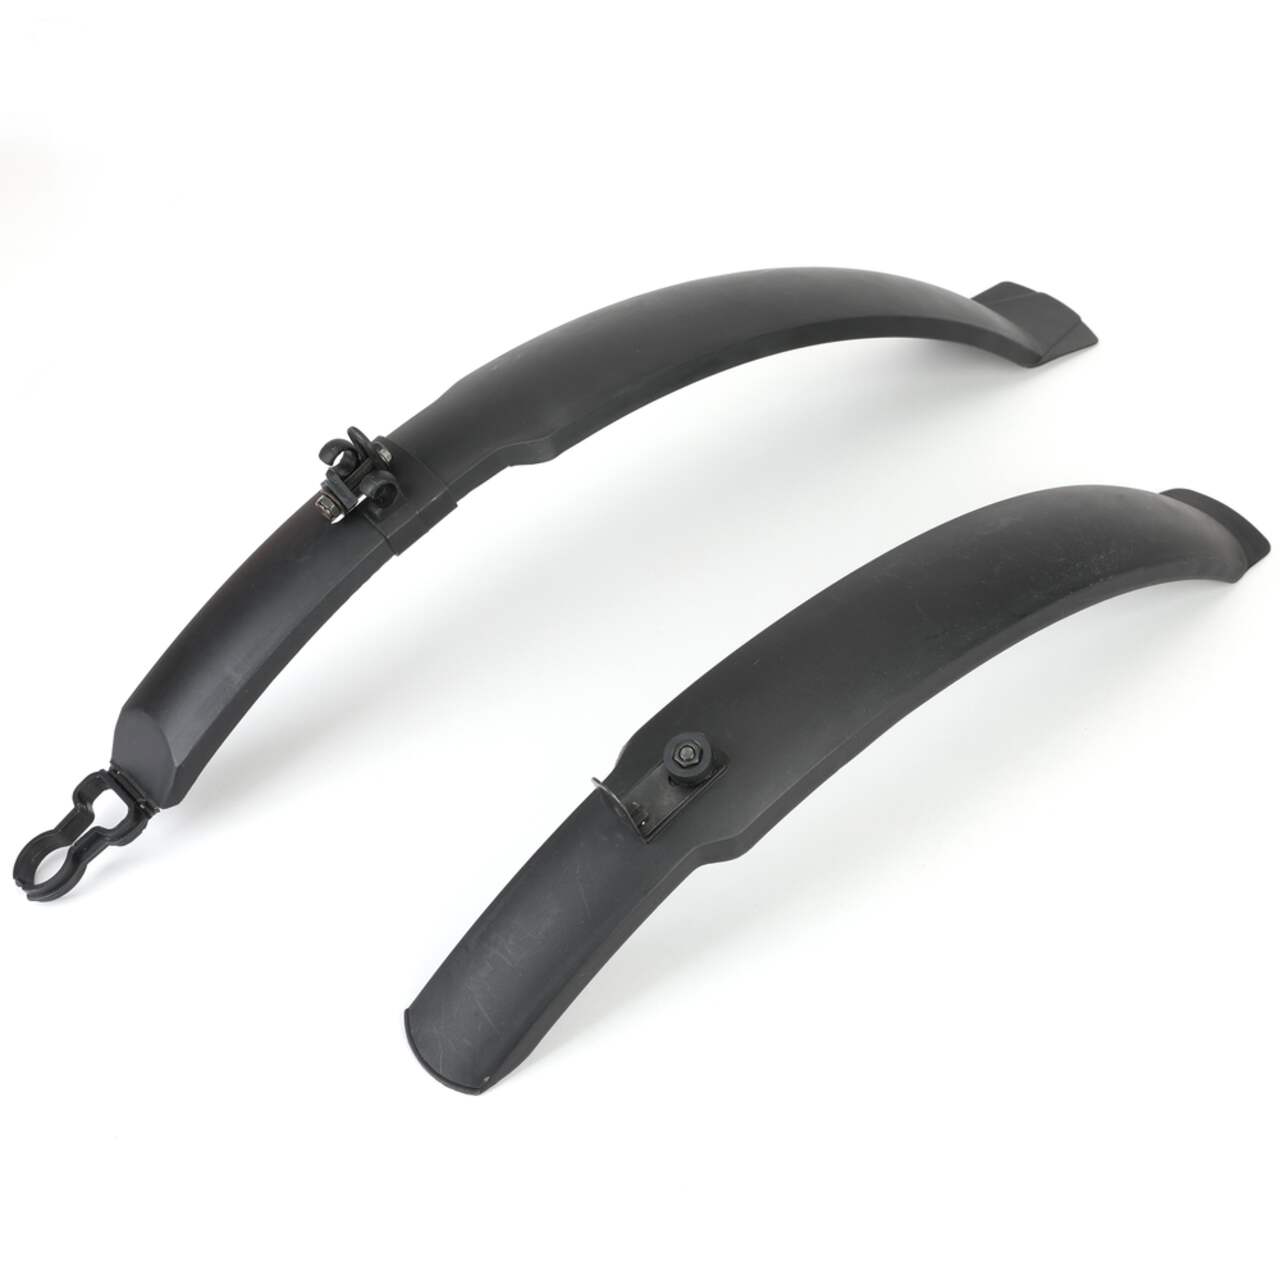 https://media-www.canadiantire.ca/product/playing/cycling/bicycle-accessories/0730907/supercycle-mtb-fender-set-7599d4ba-5d7d-44ab-bae8-0a302ee269f0.png?imdensity=1&imwidth=640&impolicy=mZoom